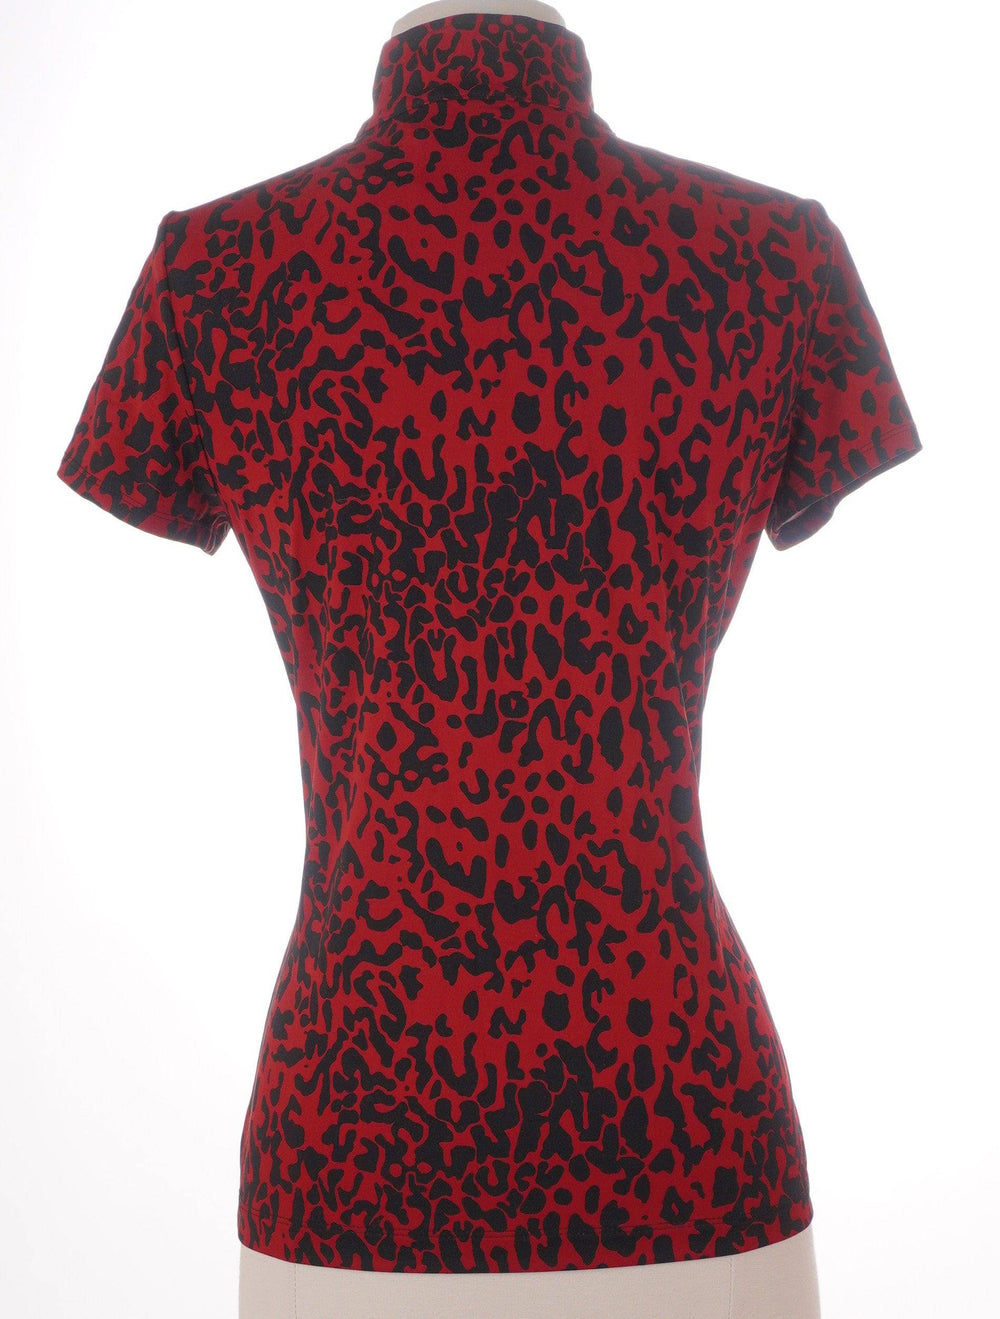 Zenergy Golf Red / 0 / Consigned Zenergy Golf Short Sleeve Top - Red Leopard - Size 0